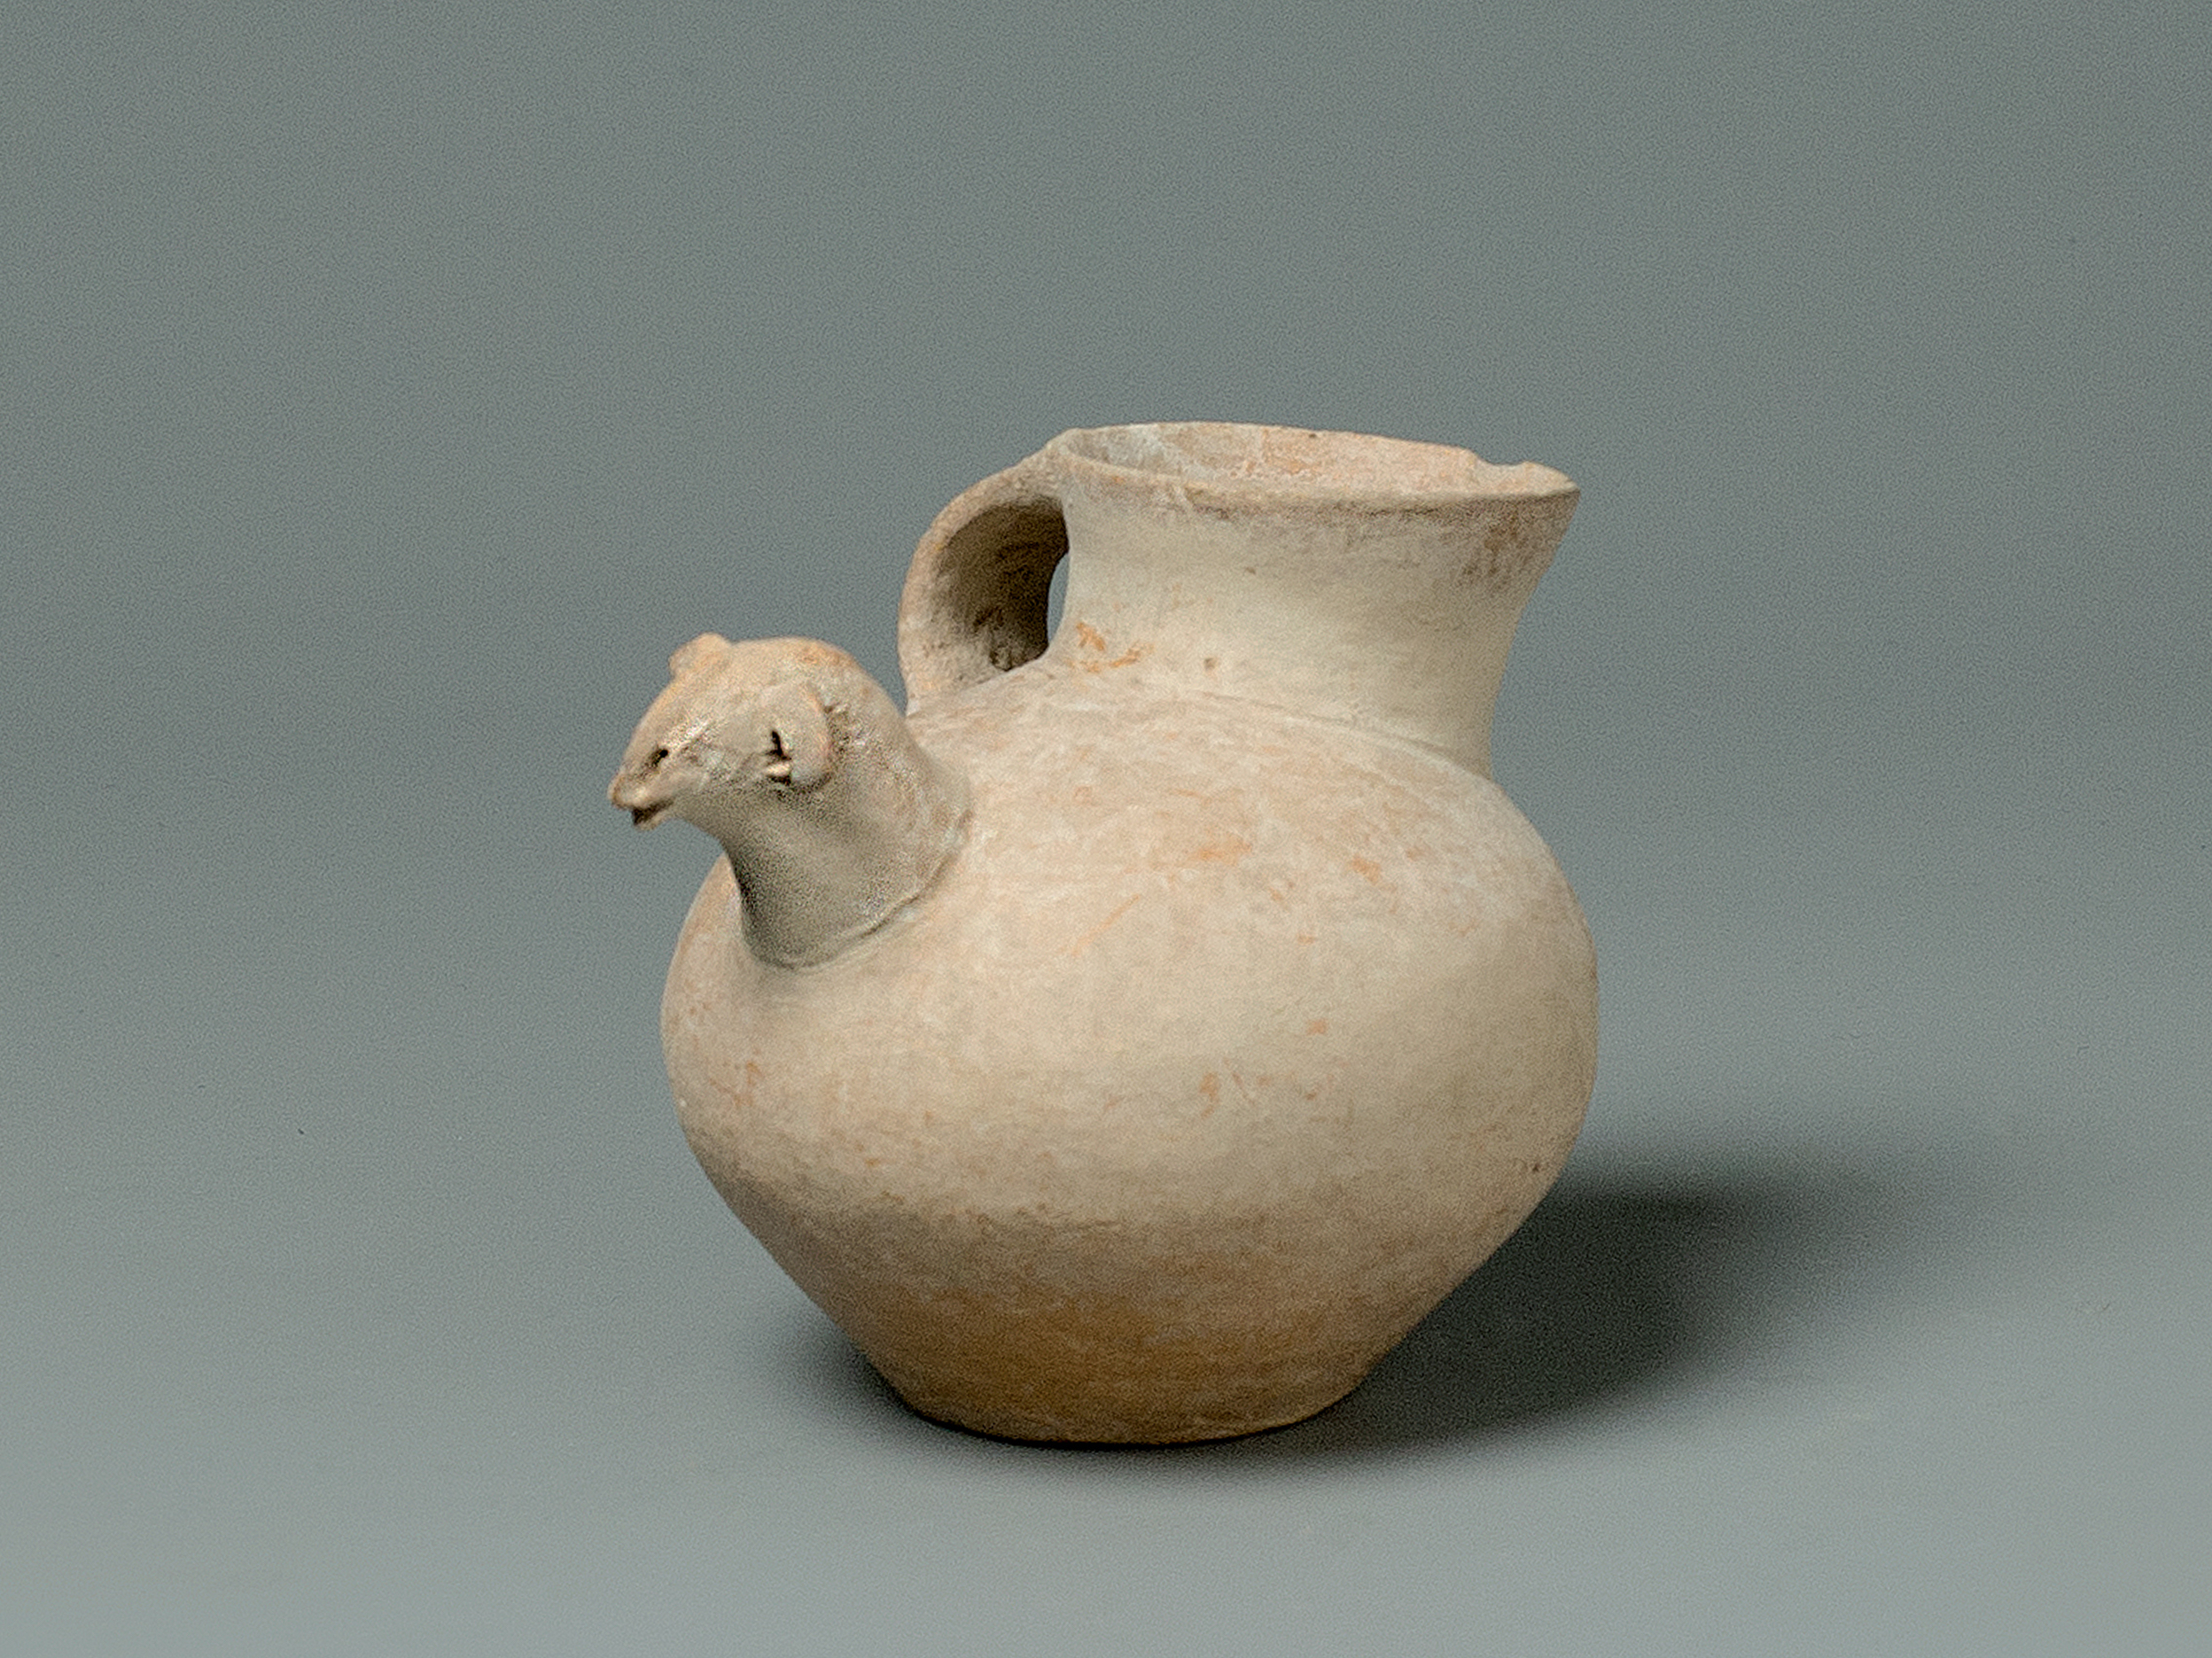 A Red Pottery Vase With Ram’s Head Handle, Gansu Province, Qijia Culture (2050-1700 Bc)